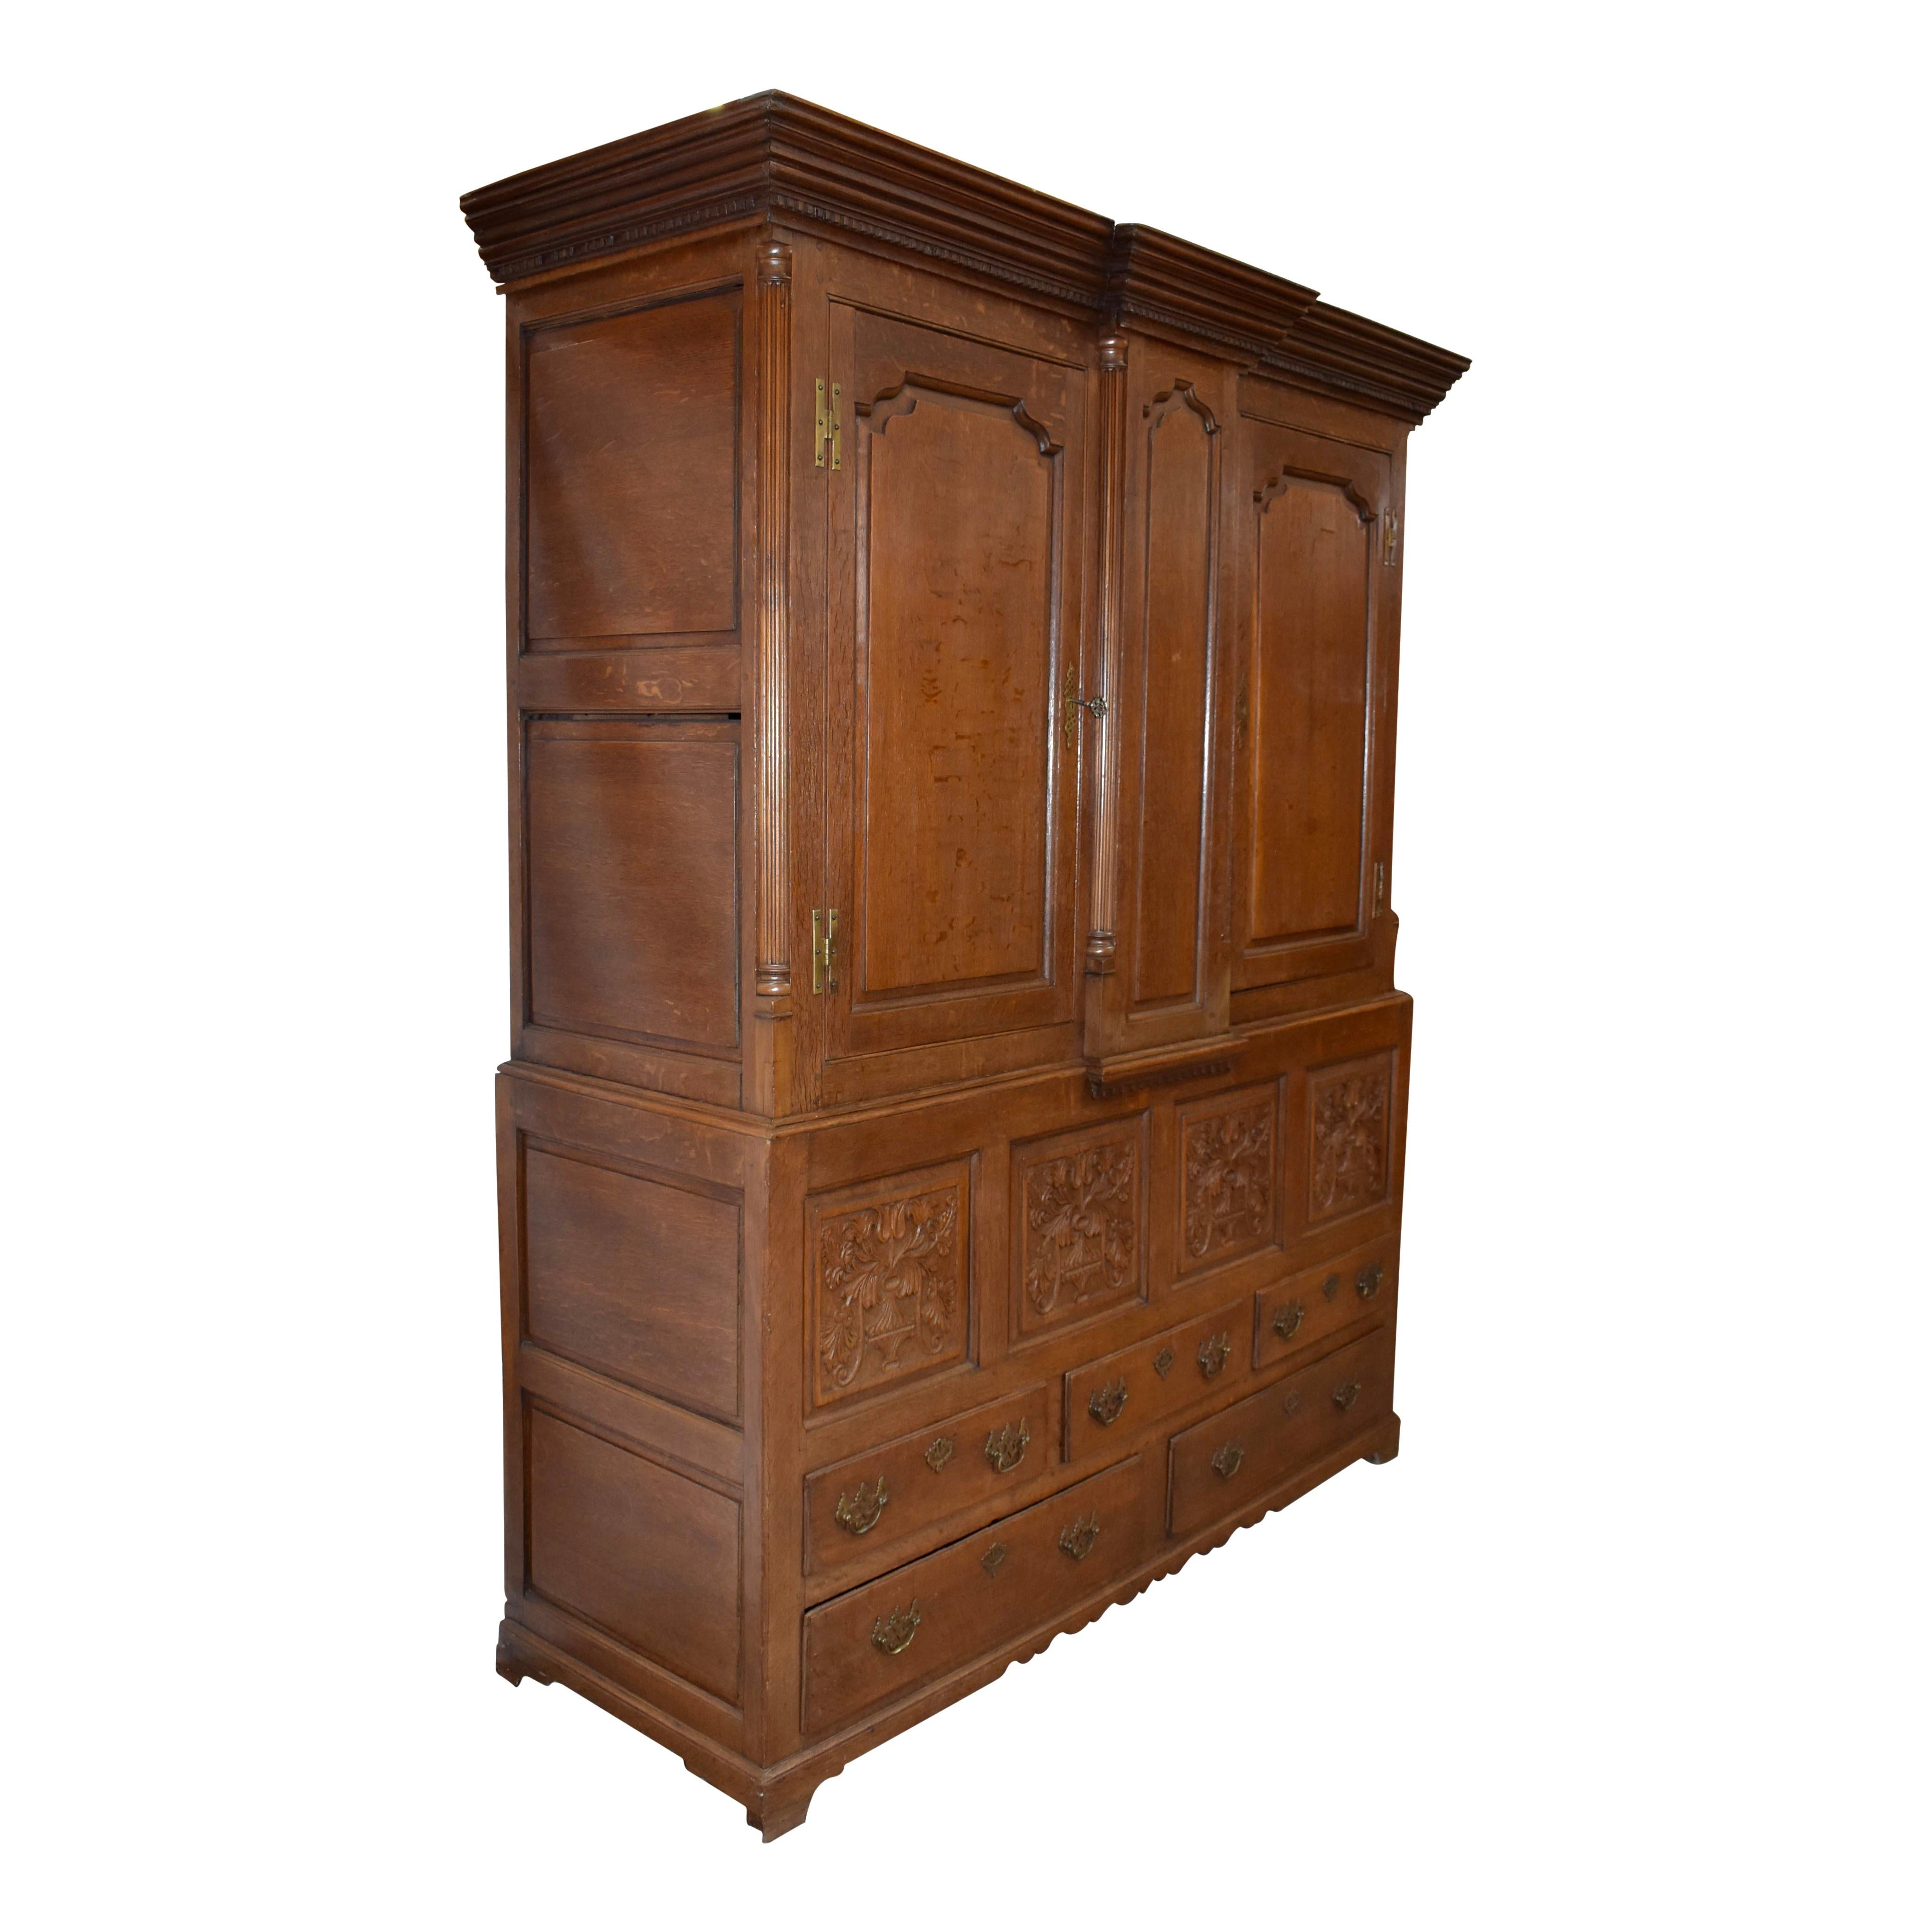 Generous storage abounds in this beautiful linen press cabinet from England. Featuring solid oak, double bodied construction, the top piece of the cabinet showcases a breakfront design and a molded cornice with dentil trim. The raised panel doors